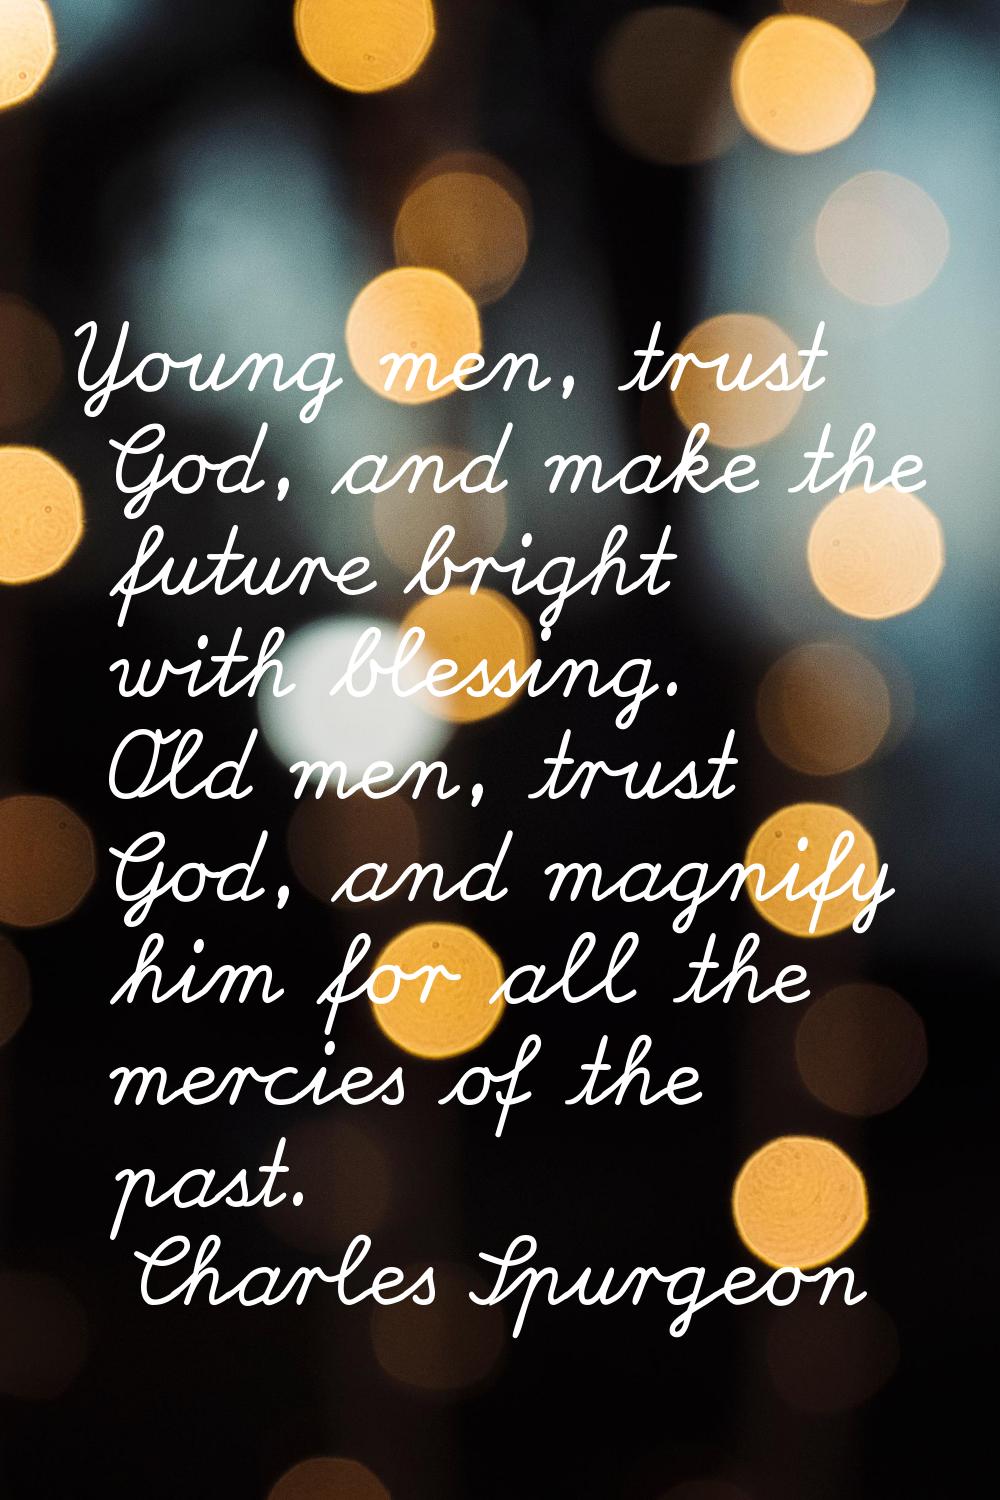 Young men, trust God, and make the future bright with blessing. Old men, trust God, and magnify him